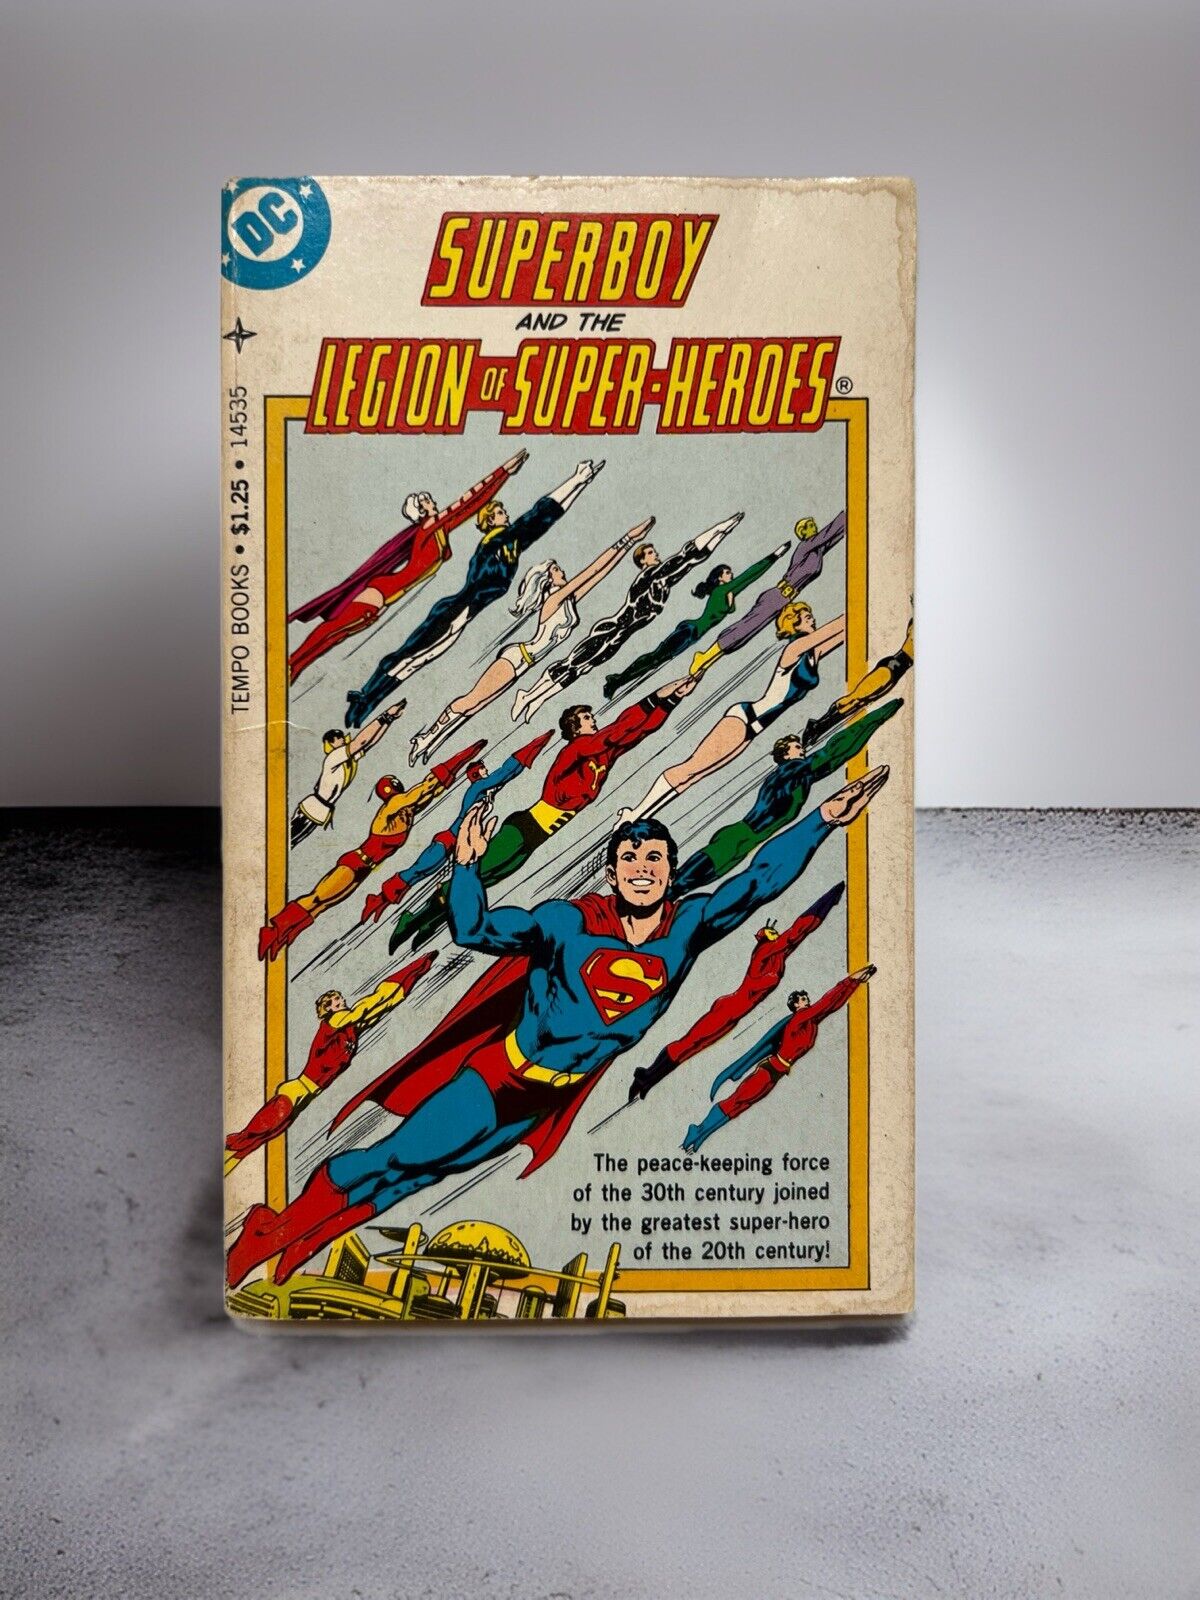 SUPERBOY AND THE LEGION OF SUPERHEROES PAPERBACK, PB, TEMPO BOOKS, DC, 1977